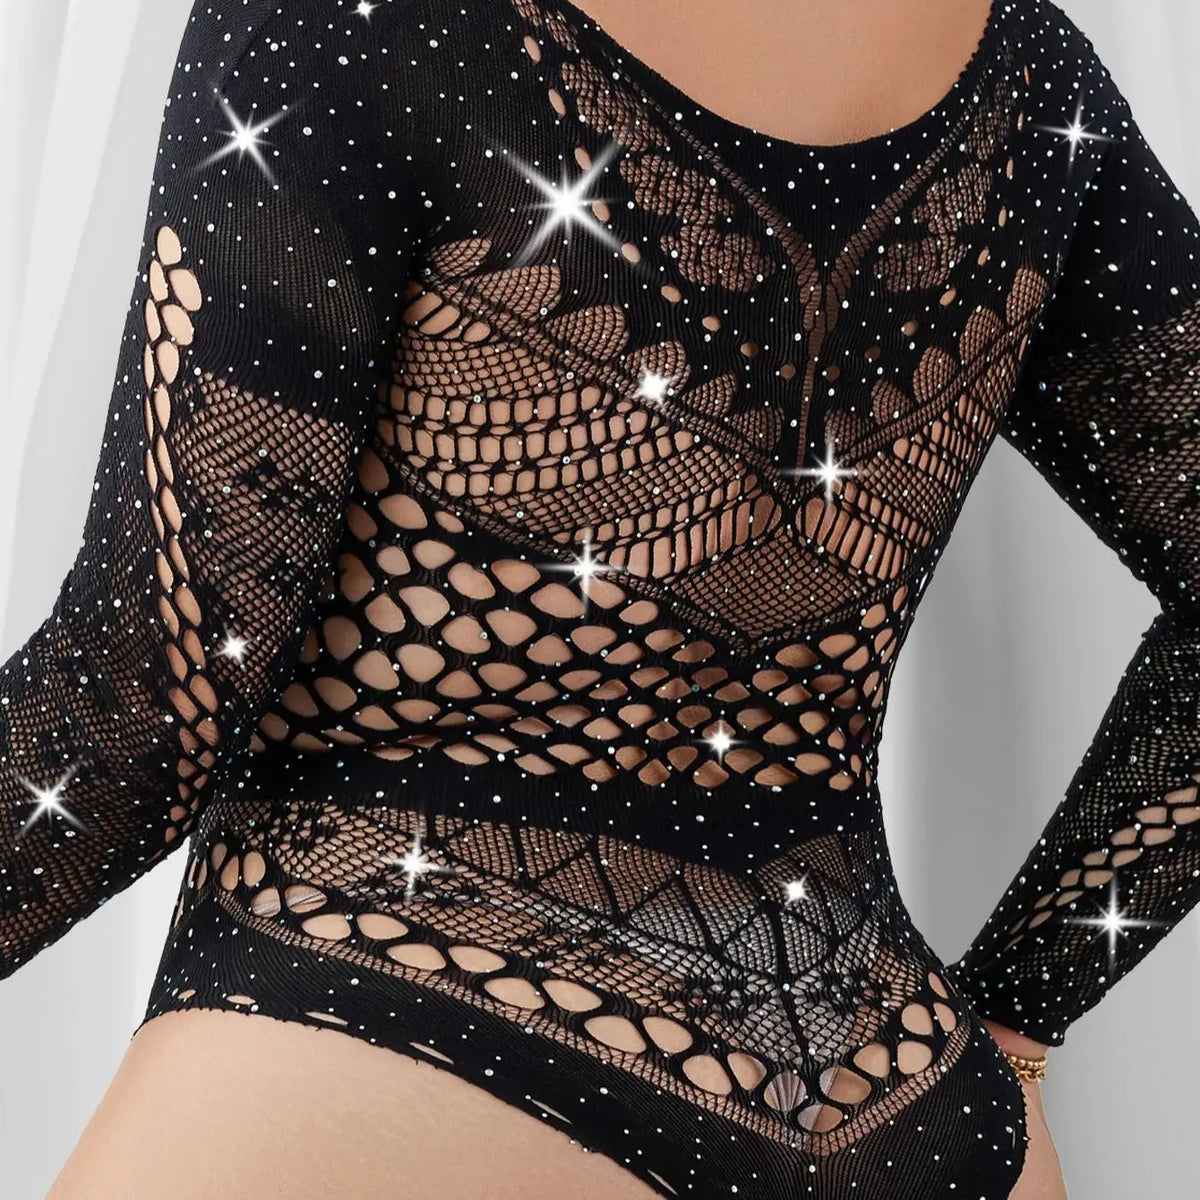 Plus Size Sexy Tights Rhinestone Floral Lace Patterned Fishnet Stretchy Fit Semi Sheer Sensual Bodysuit Underwear